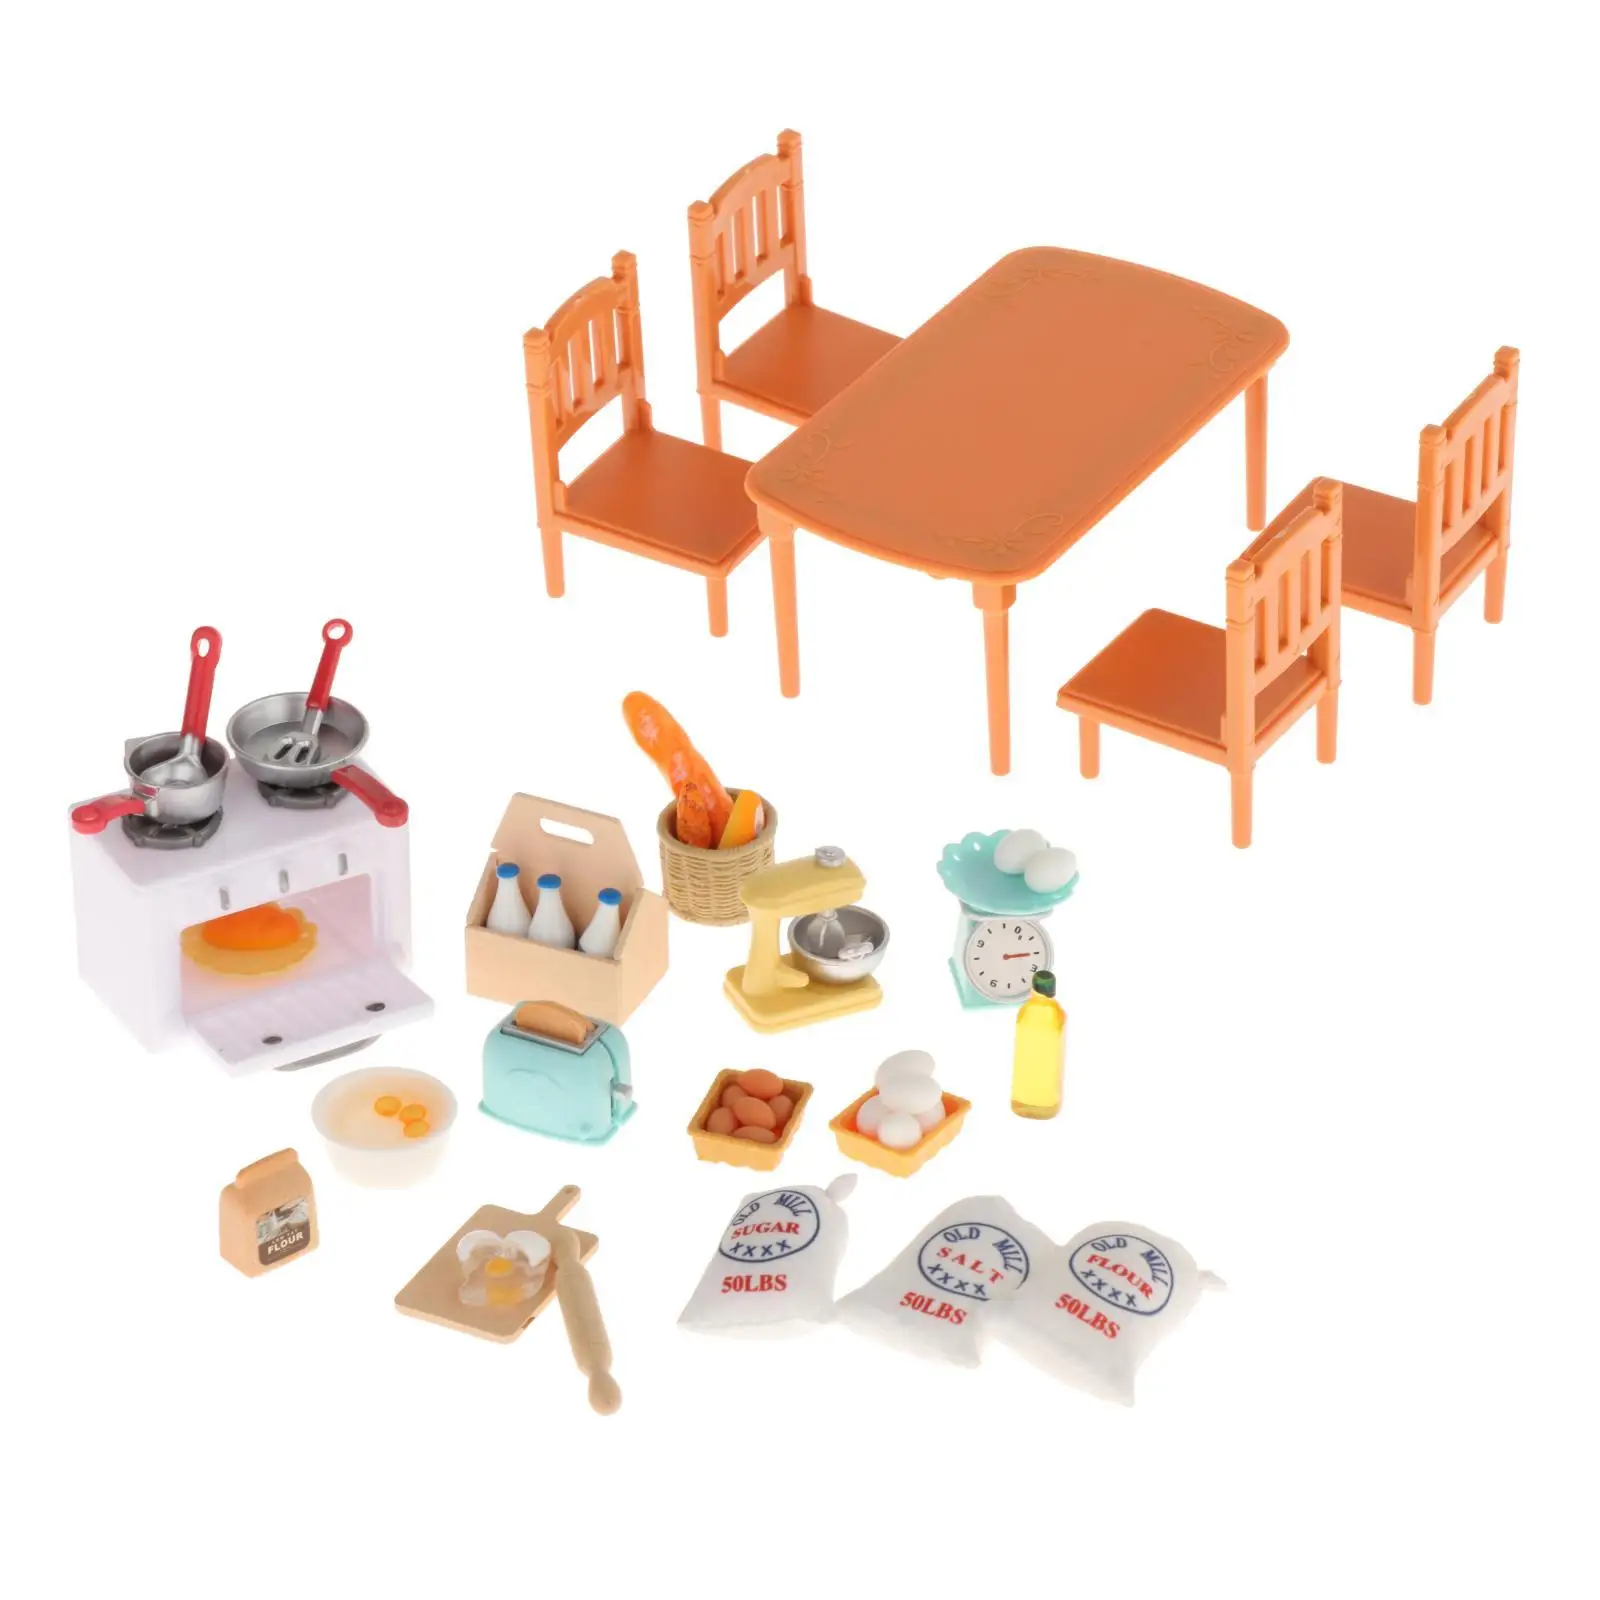 Toddlers Pretend Cooking Playset Doll House Furniture Role Playing Utensils Cookware Toys for Coffee Age 3+